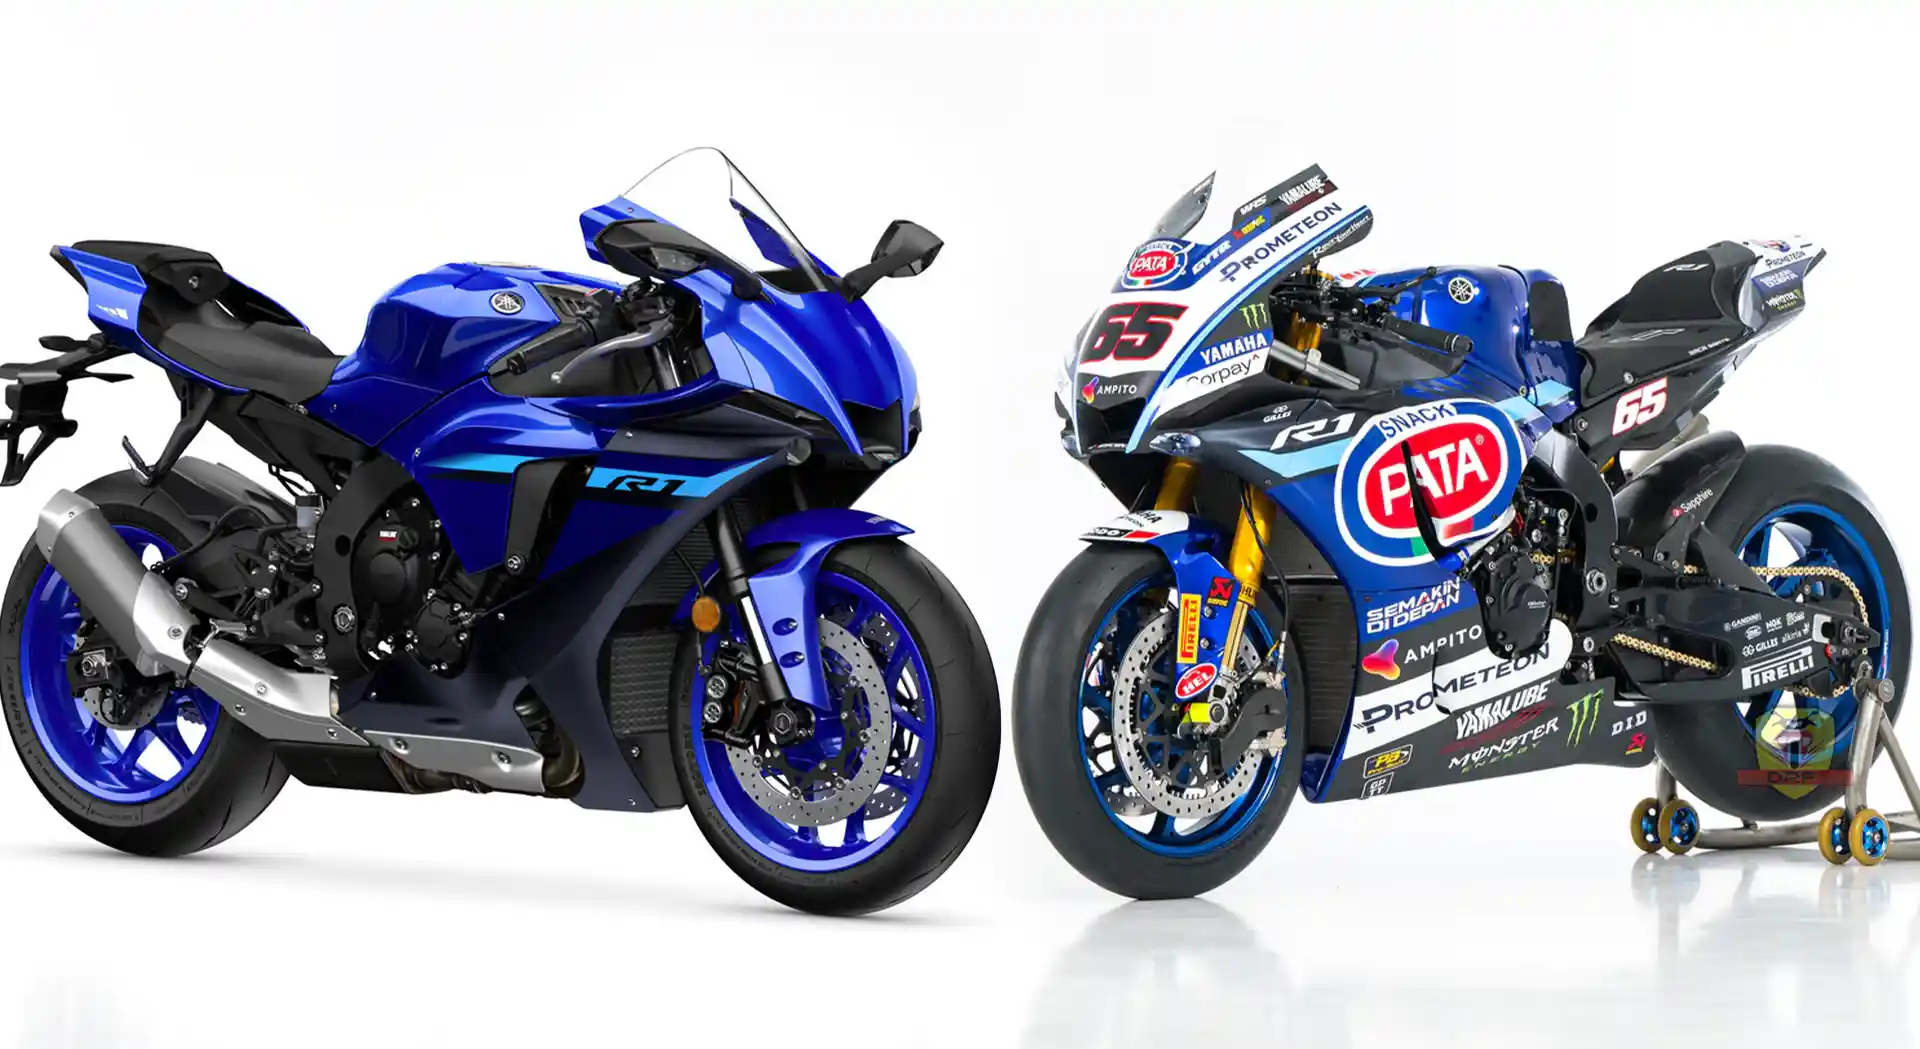 Even Though It Will No Longer Be Produced, The Yamaha R1 Will Still Be Present at WSBK